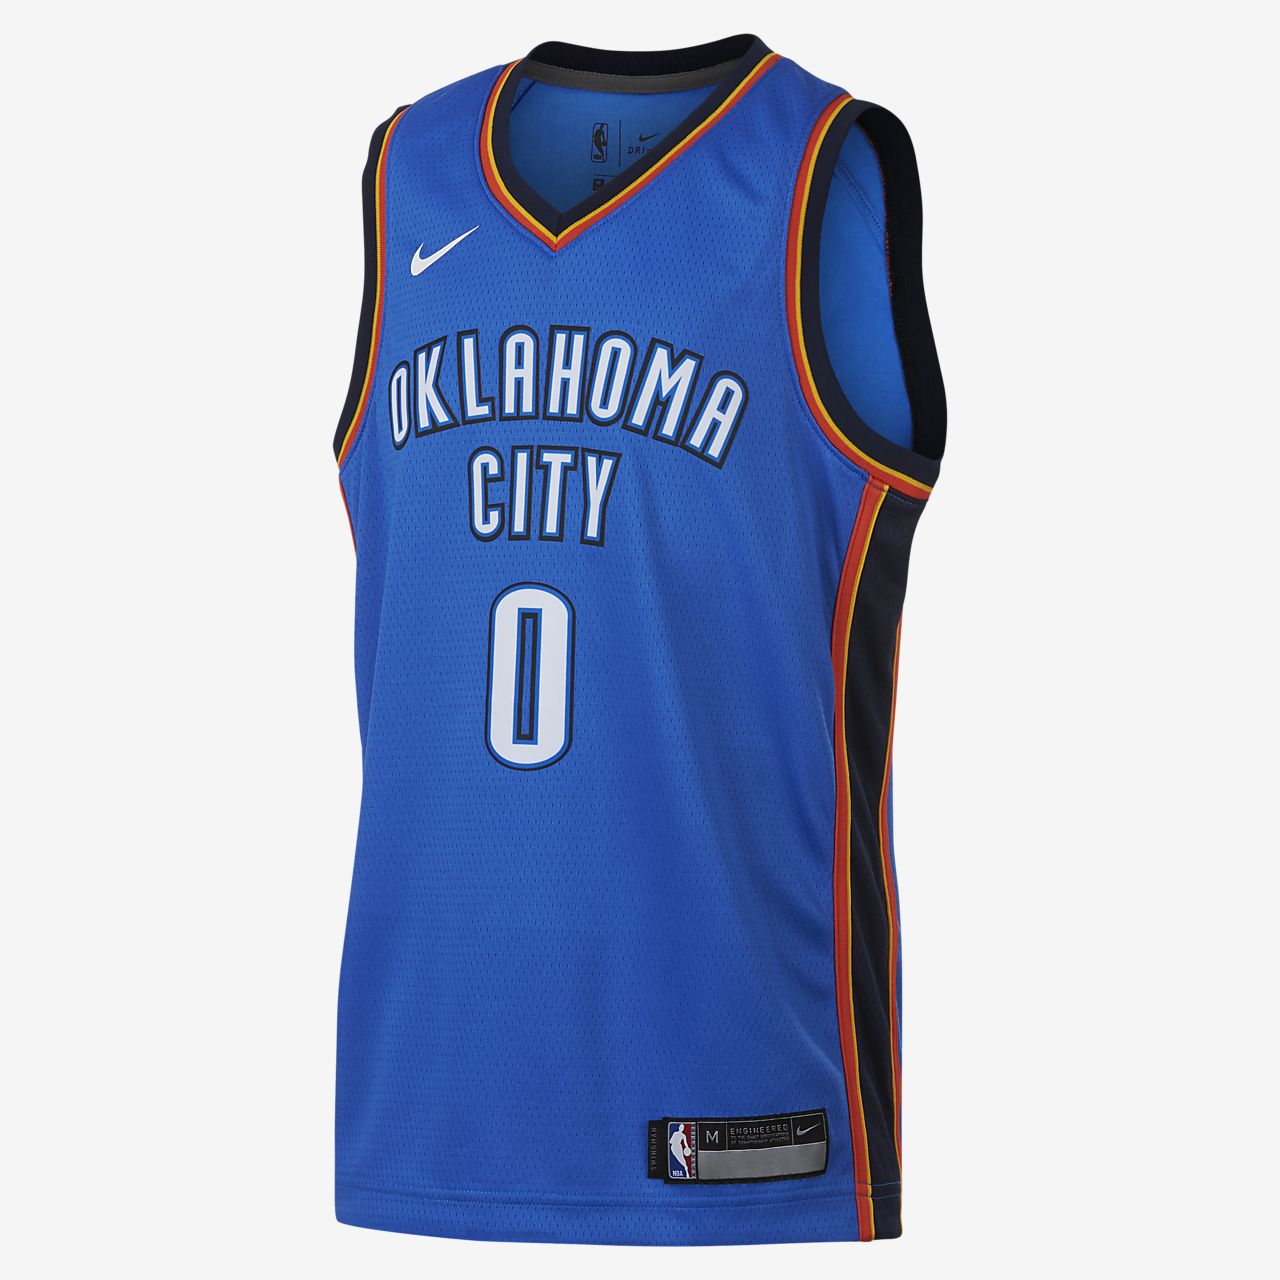 russell westbrook jersey Sale,up to 40 